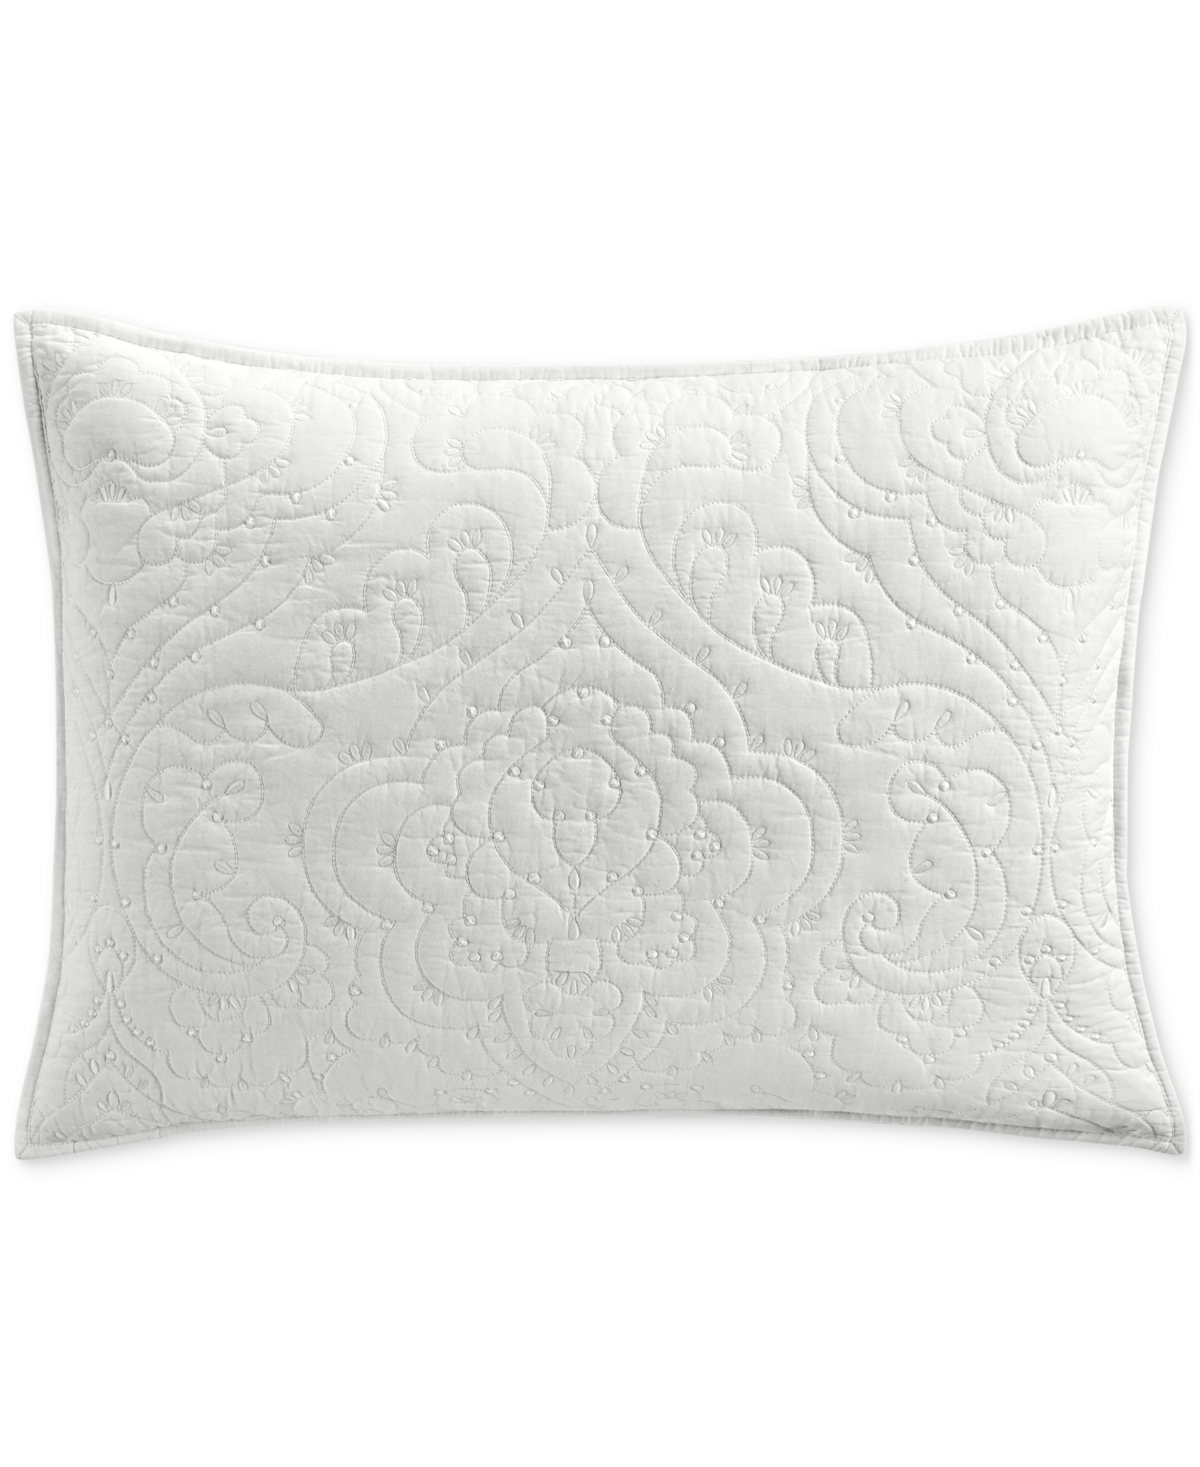 Sculpted Paisley Embroidered Cotton Pillow Sham, Standard, Created for Macy's - White